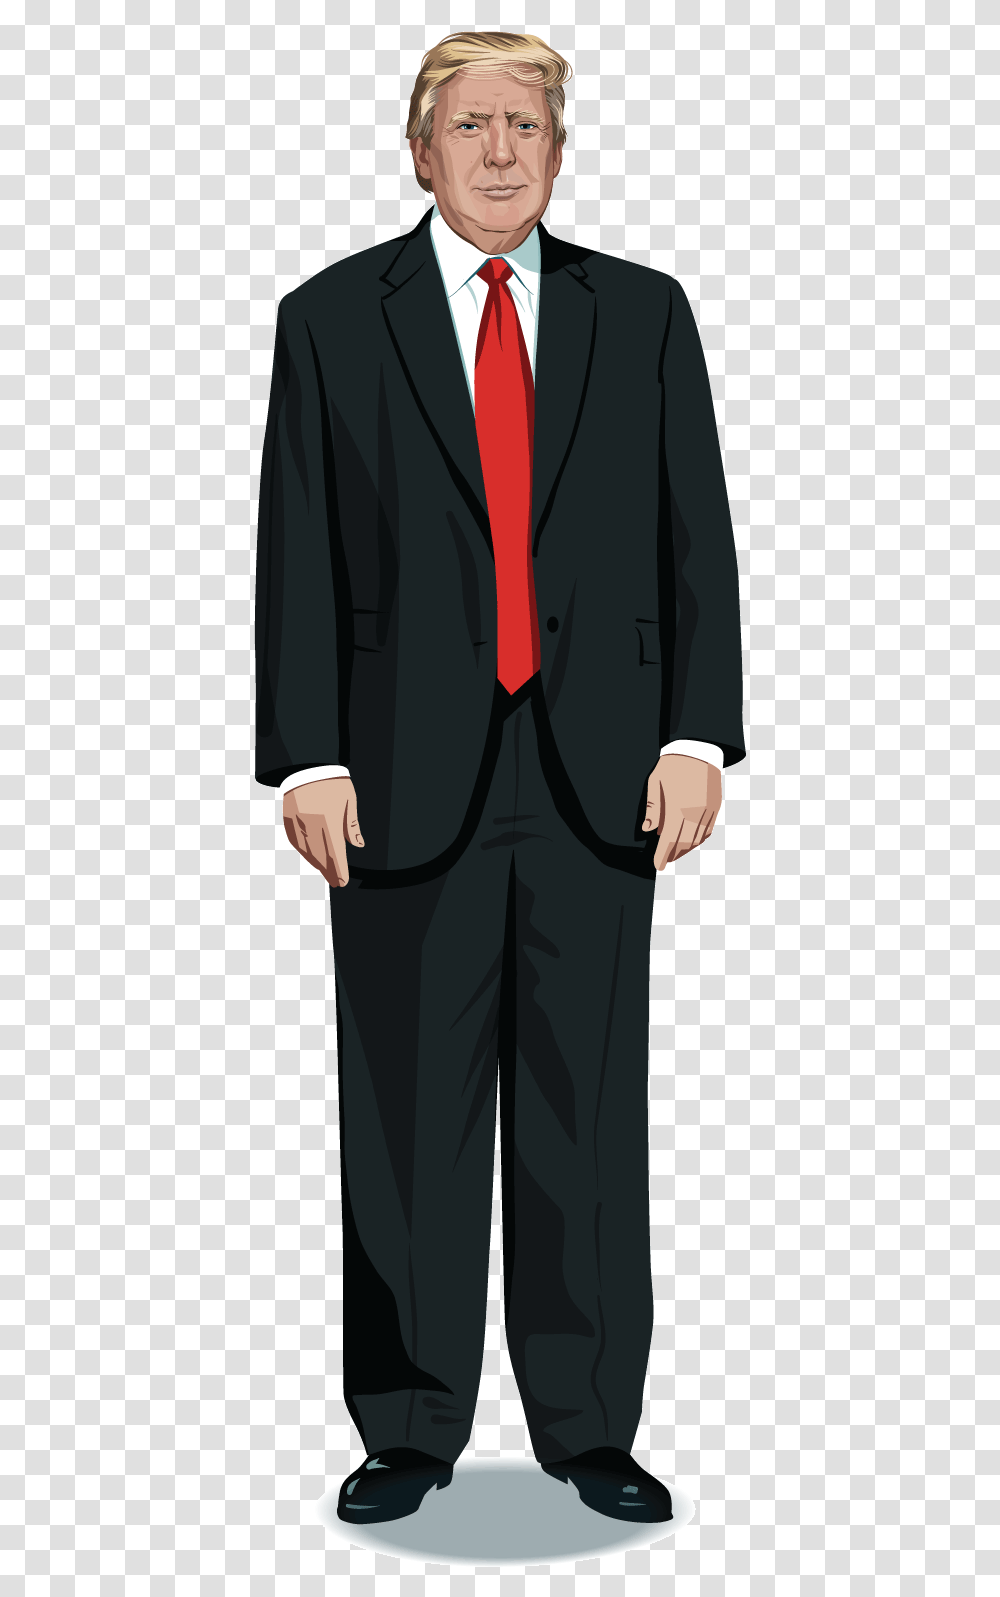 Donald Trump Who Winning The Presidential Election Full Body Trump, Tie, Accessories, Suit, Overcoat Transparent Png